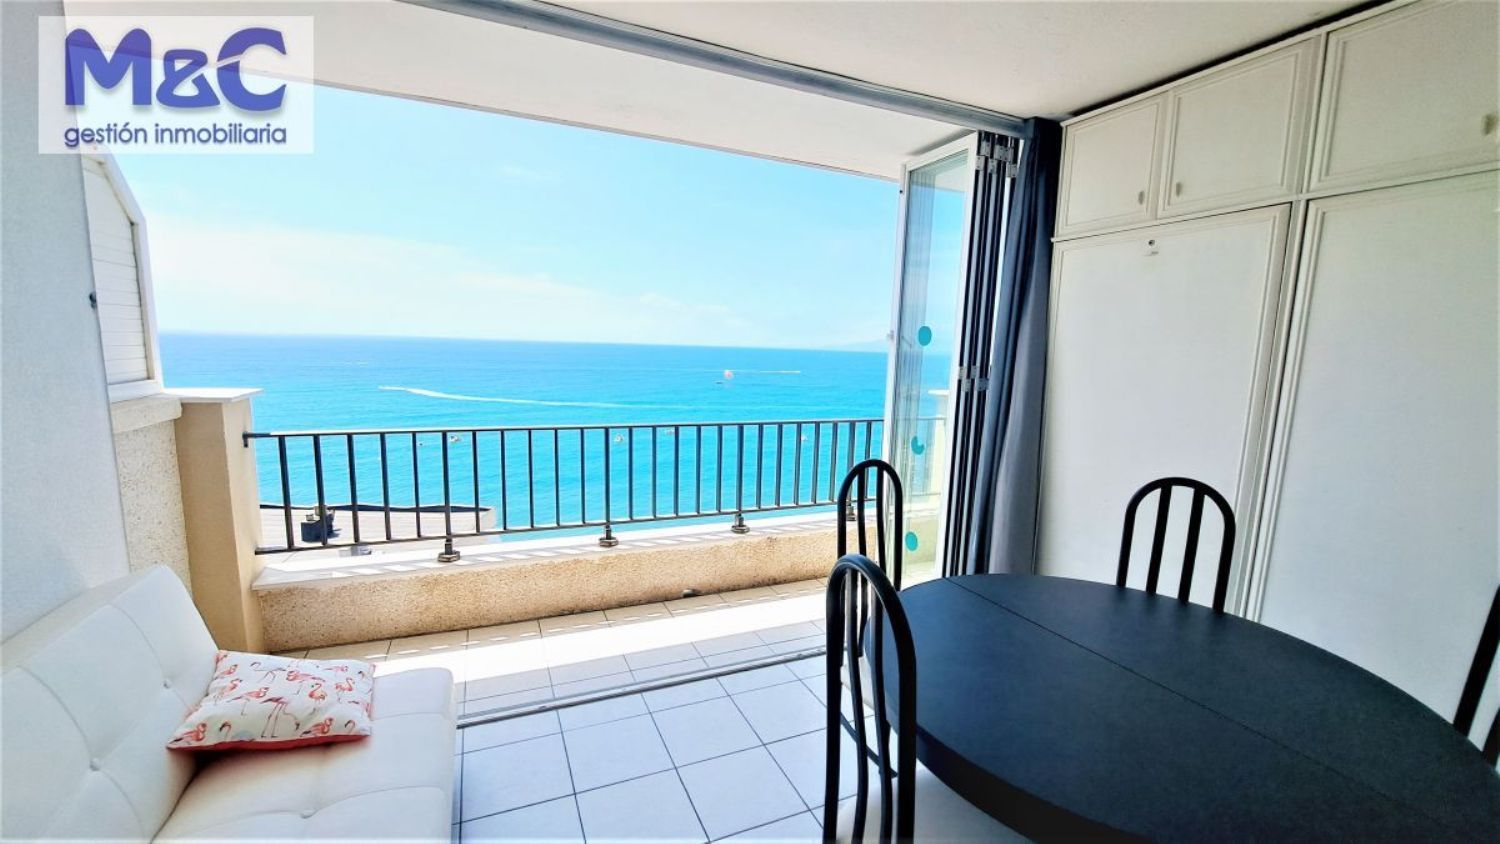 Flat for sale on the seafront on Calle de Tortosa, in Salou